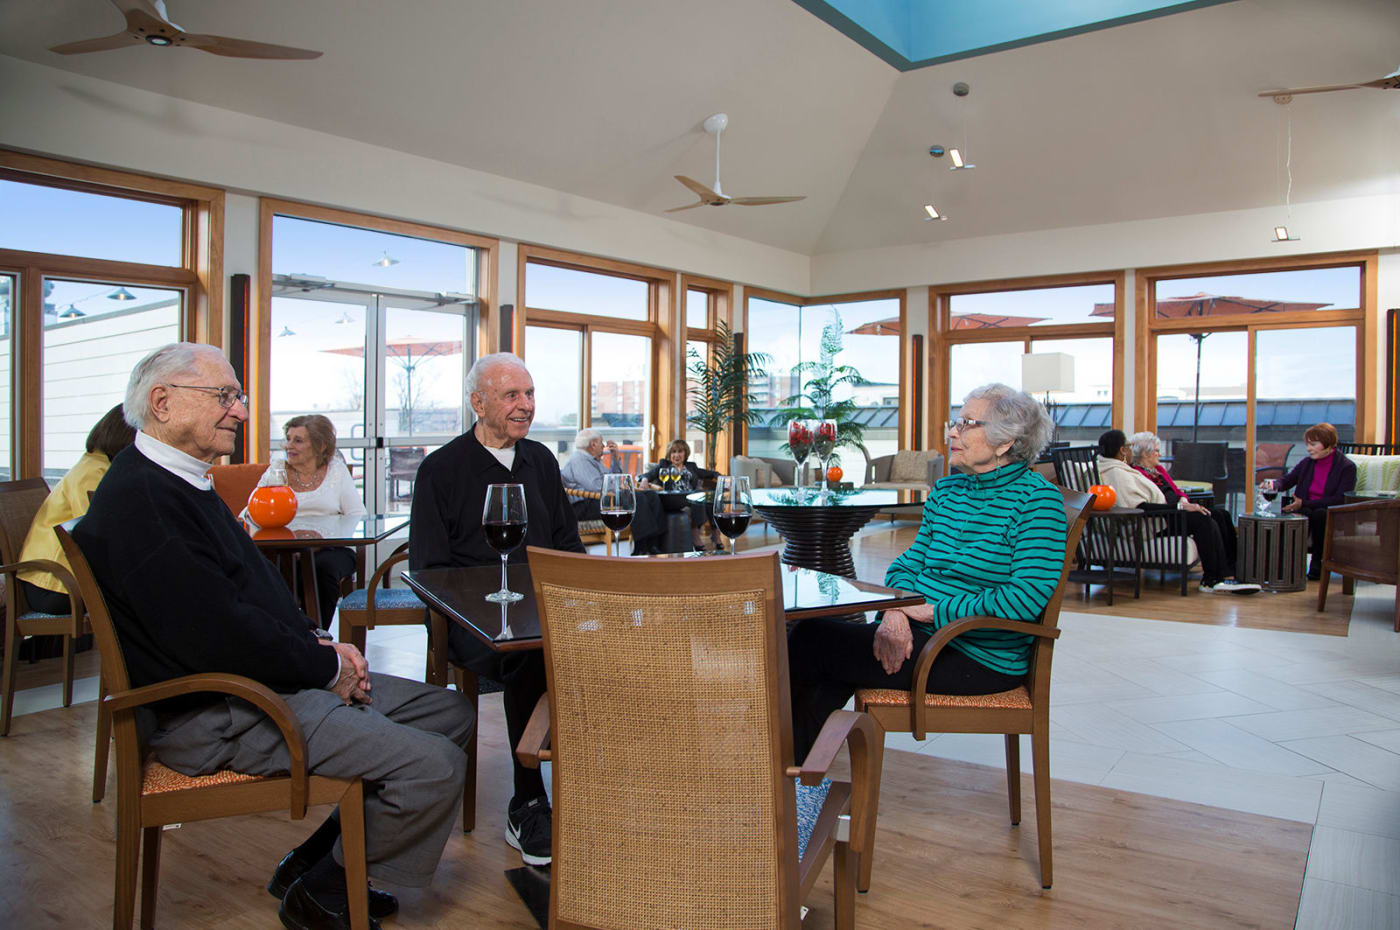 Residents enjoy dining in a naturally well lit room at All Seasons Birmingham in Birmingham, Michigan